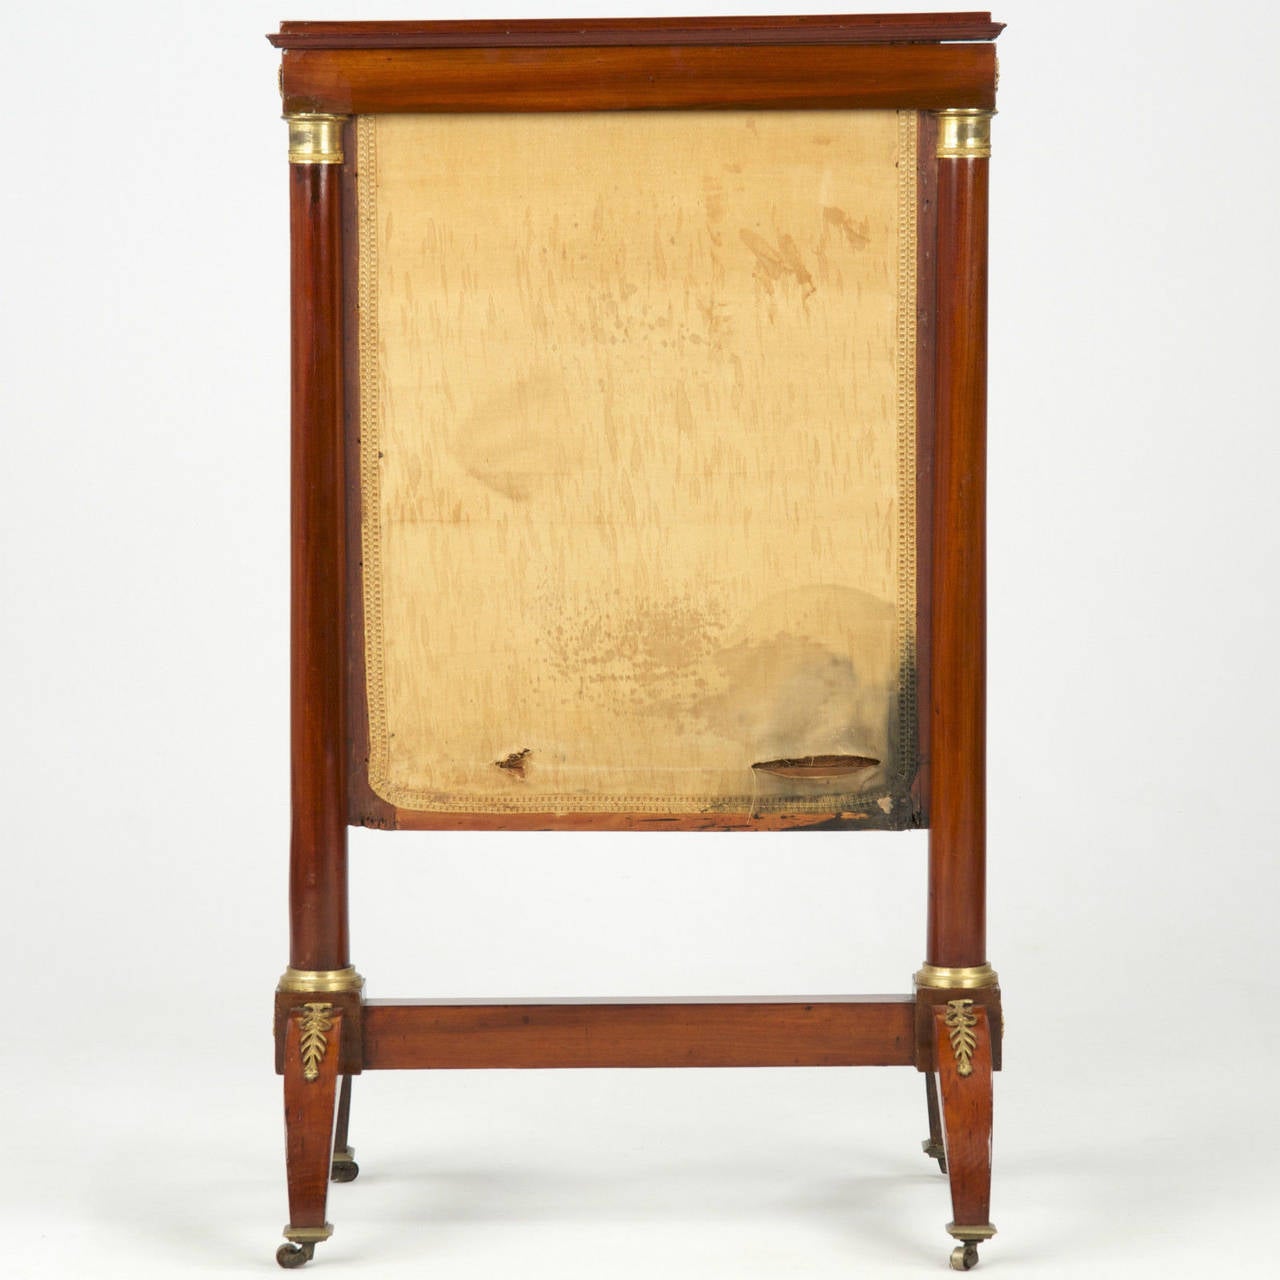 A very fine presentation piece, this firescreen frames an early hand-stitched tapestry depicting a classical scene of a figure kneeling while tending to the trunk of a tree. The tree is sawn midsection, but fresh branches and foliage have sprouted